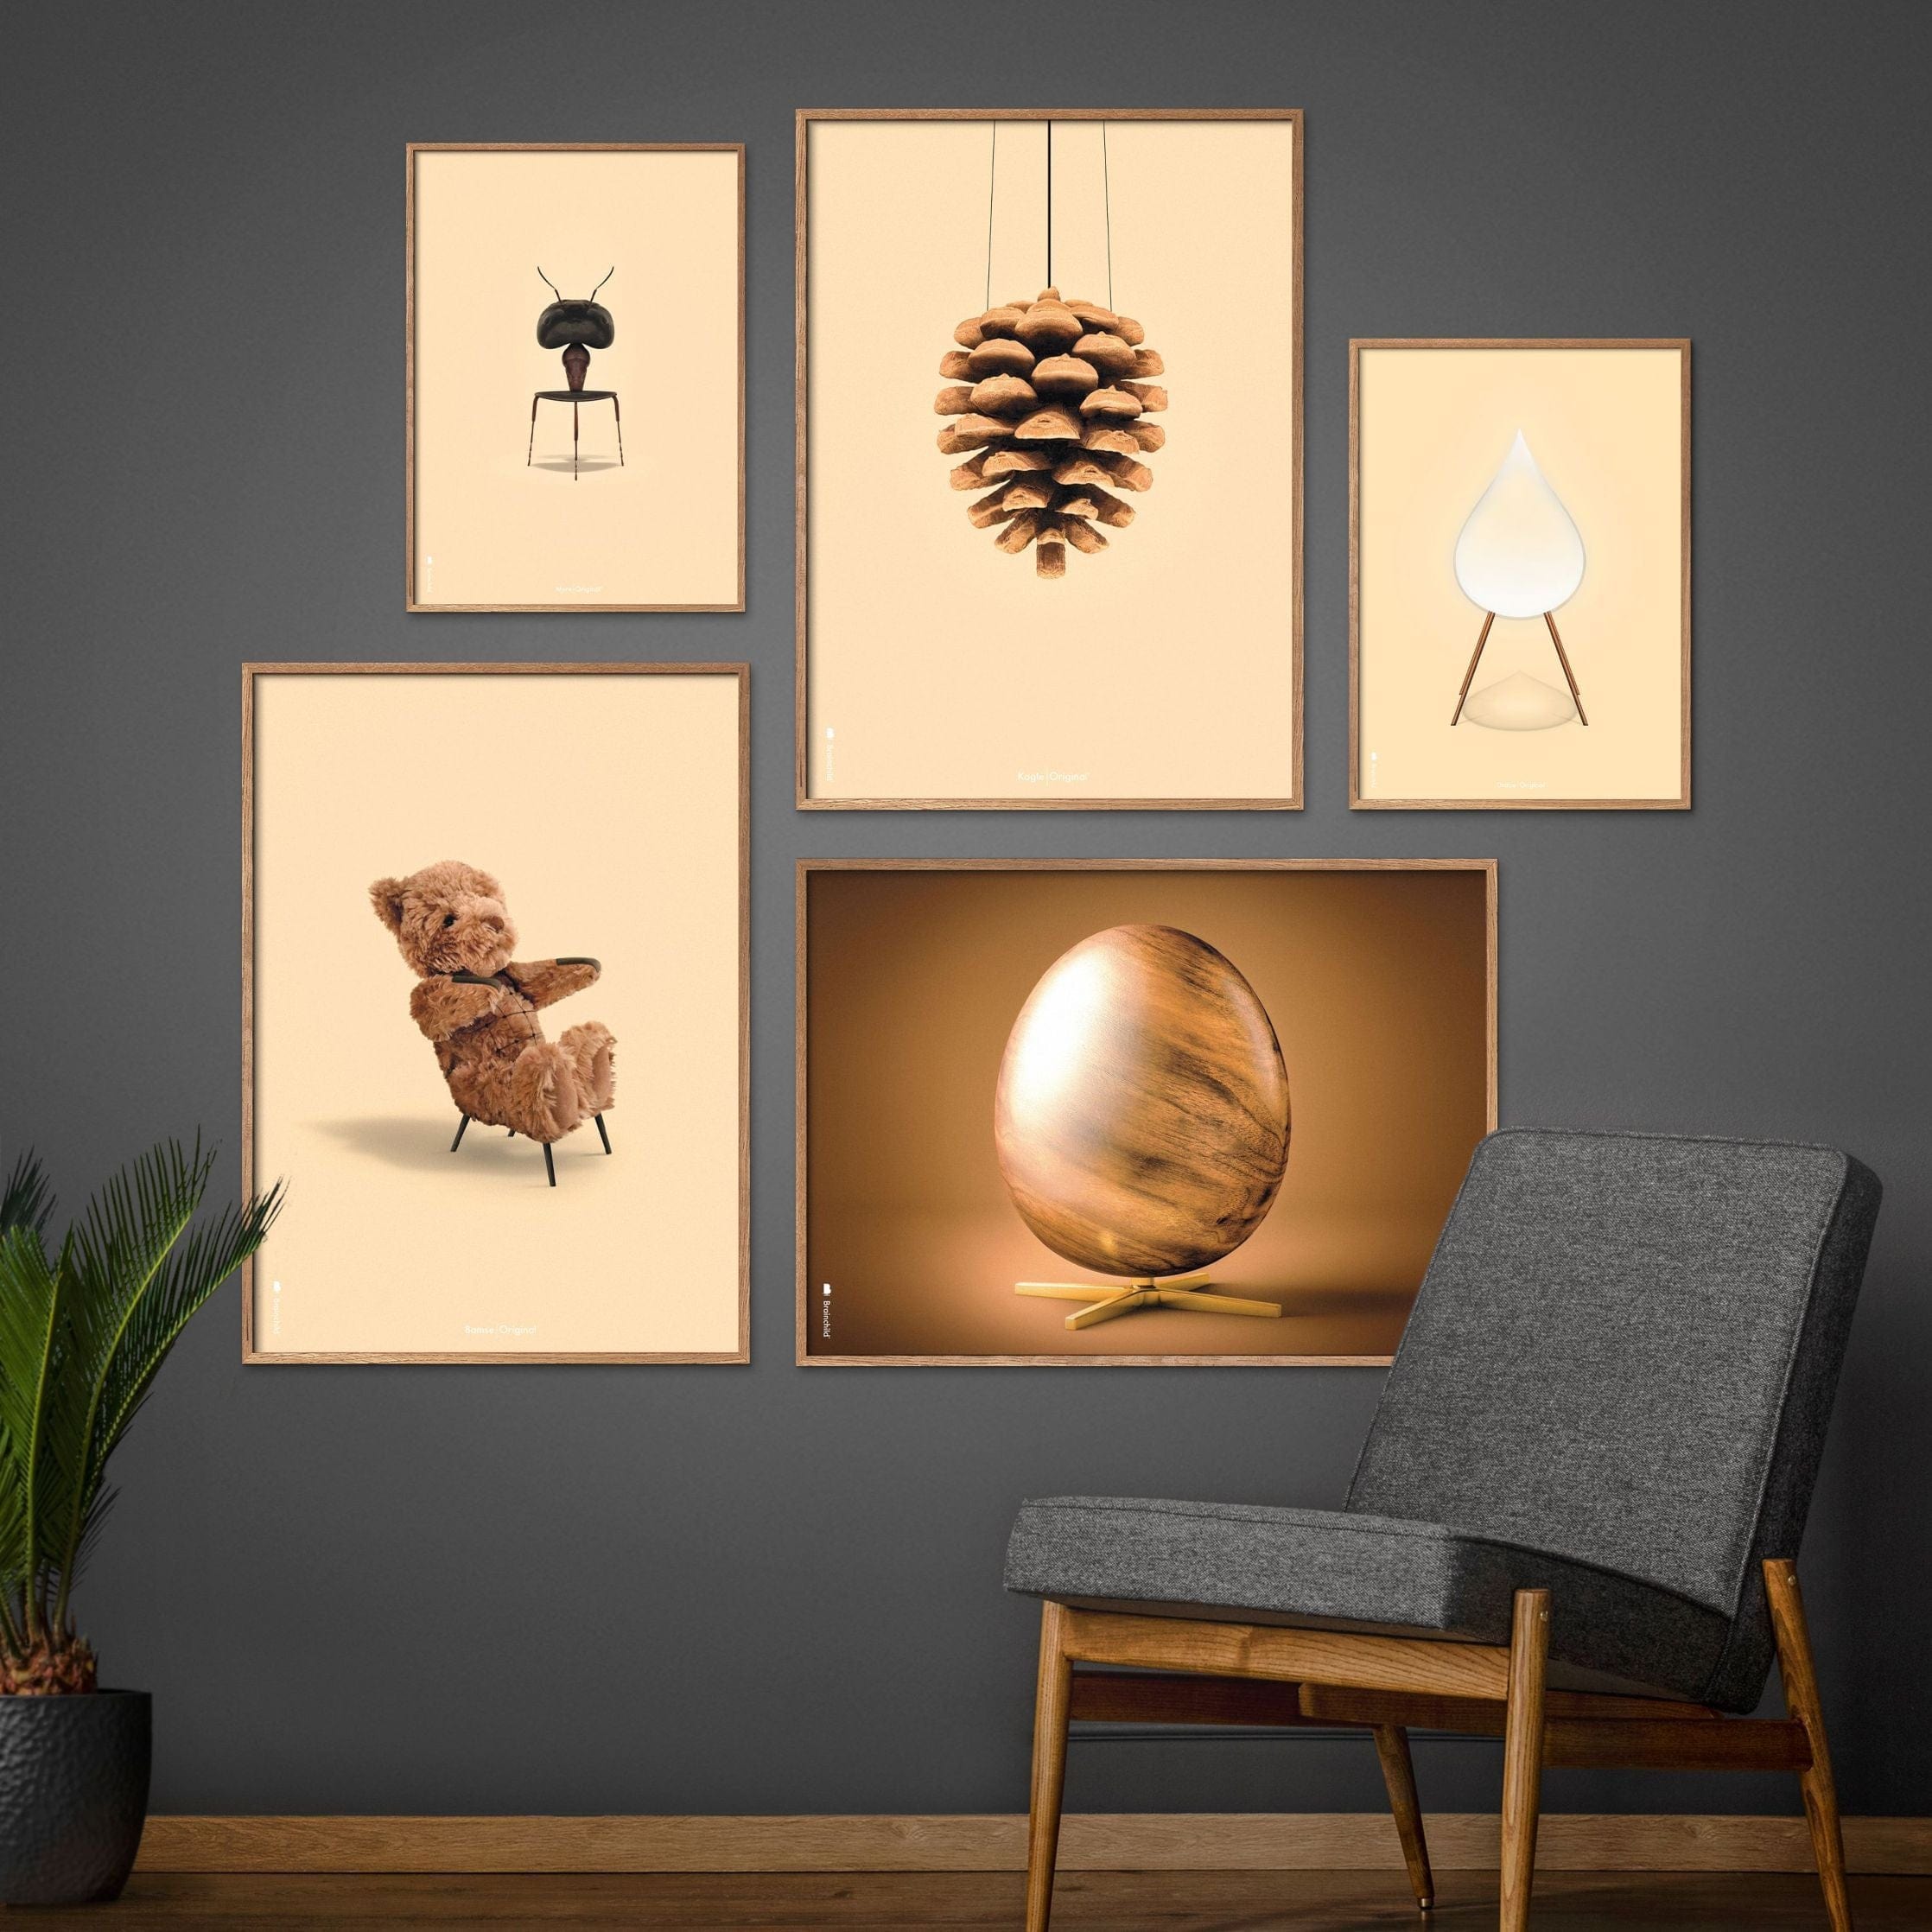 Brainchild Drop Classic Poster, Frame In Black Lacquered Wood 50x70 Cm, Sand Colored Background